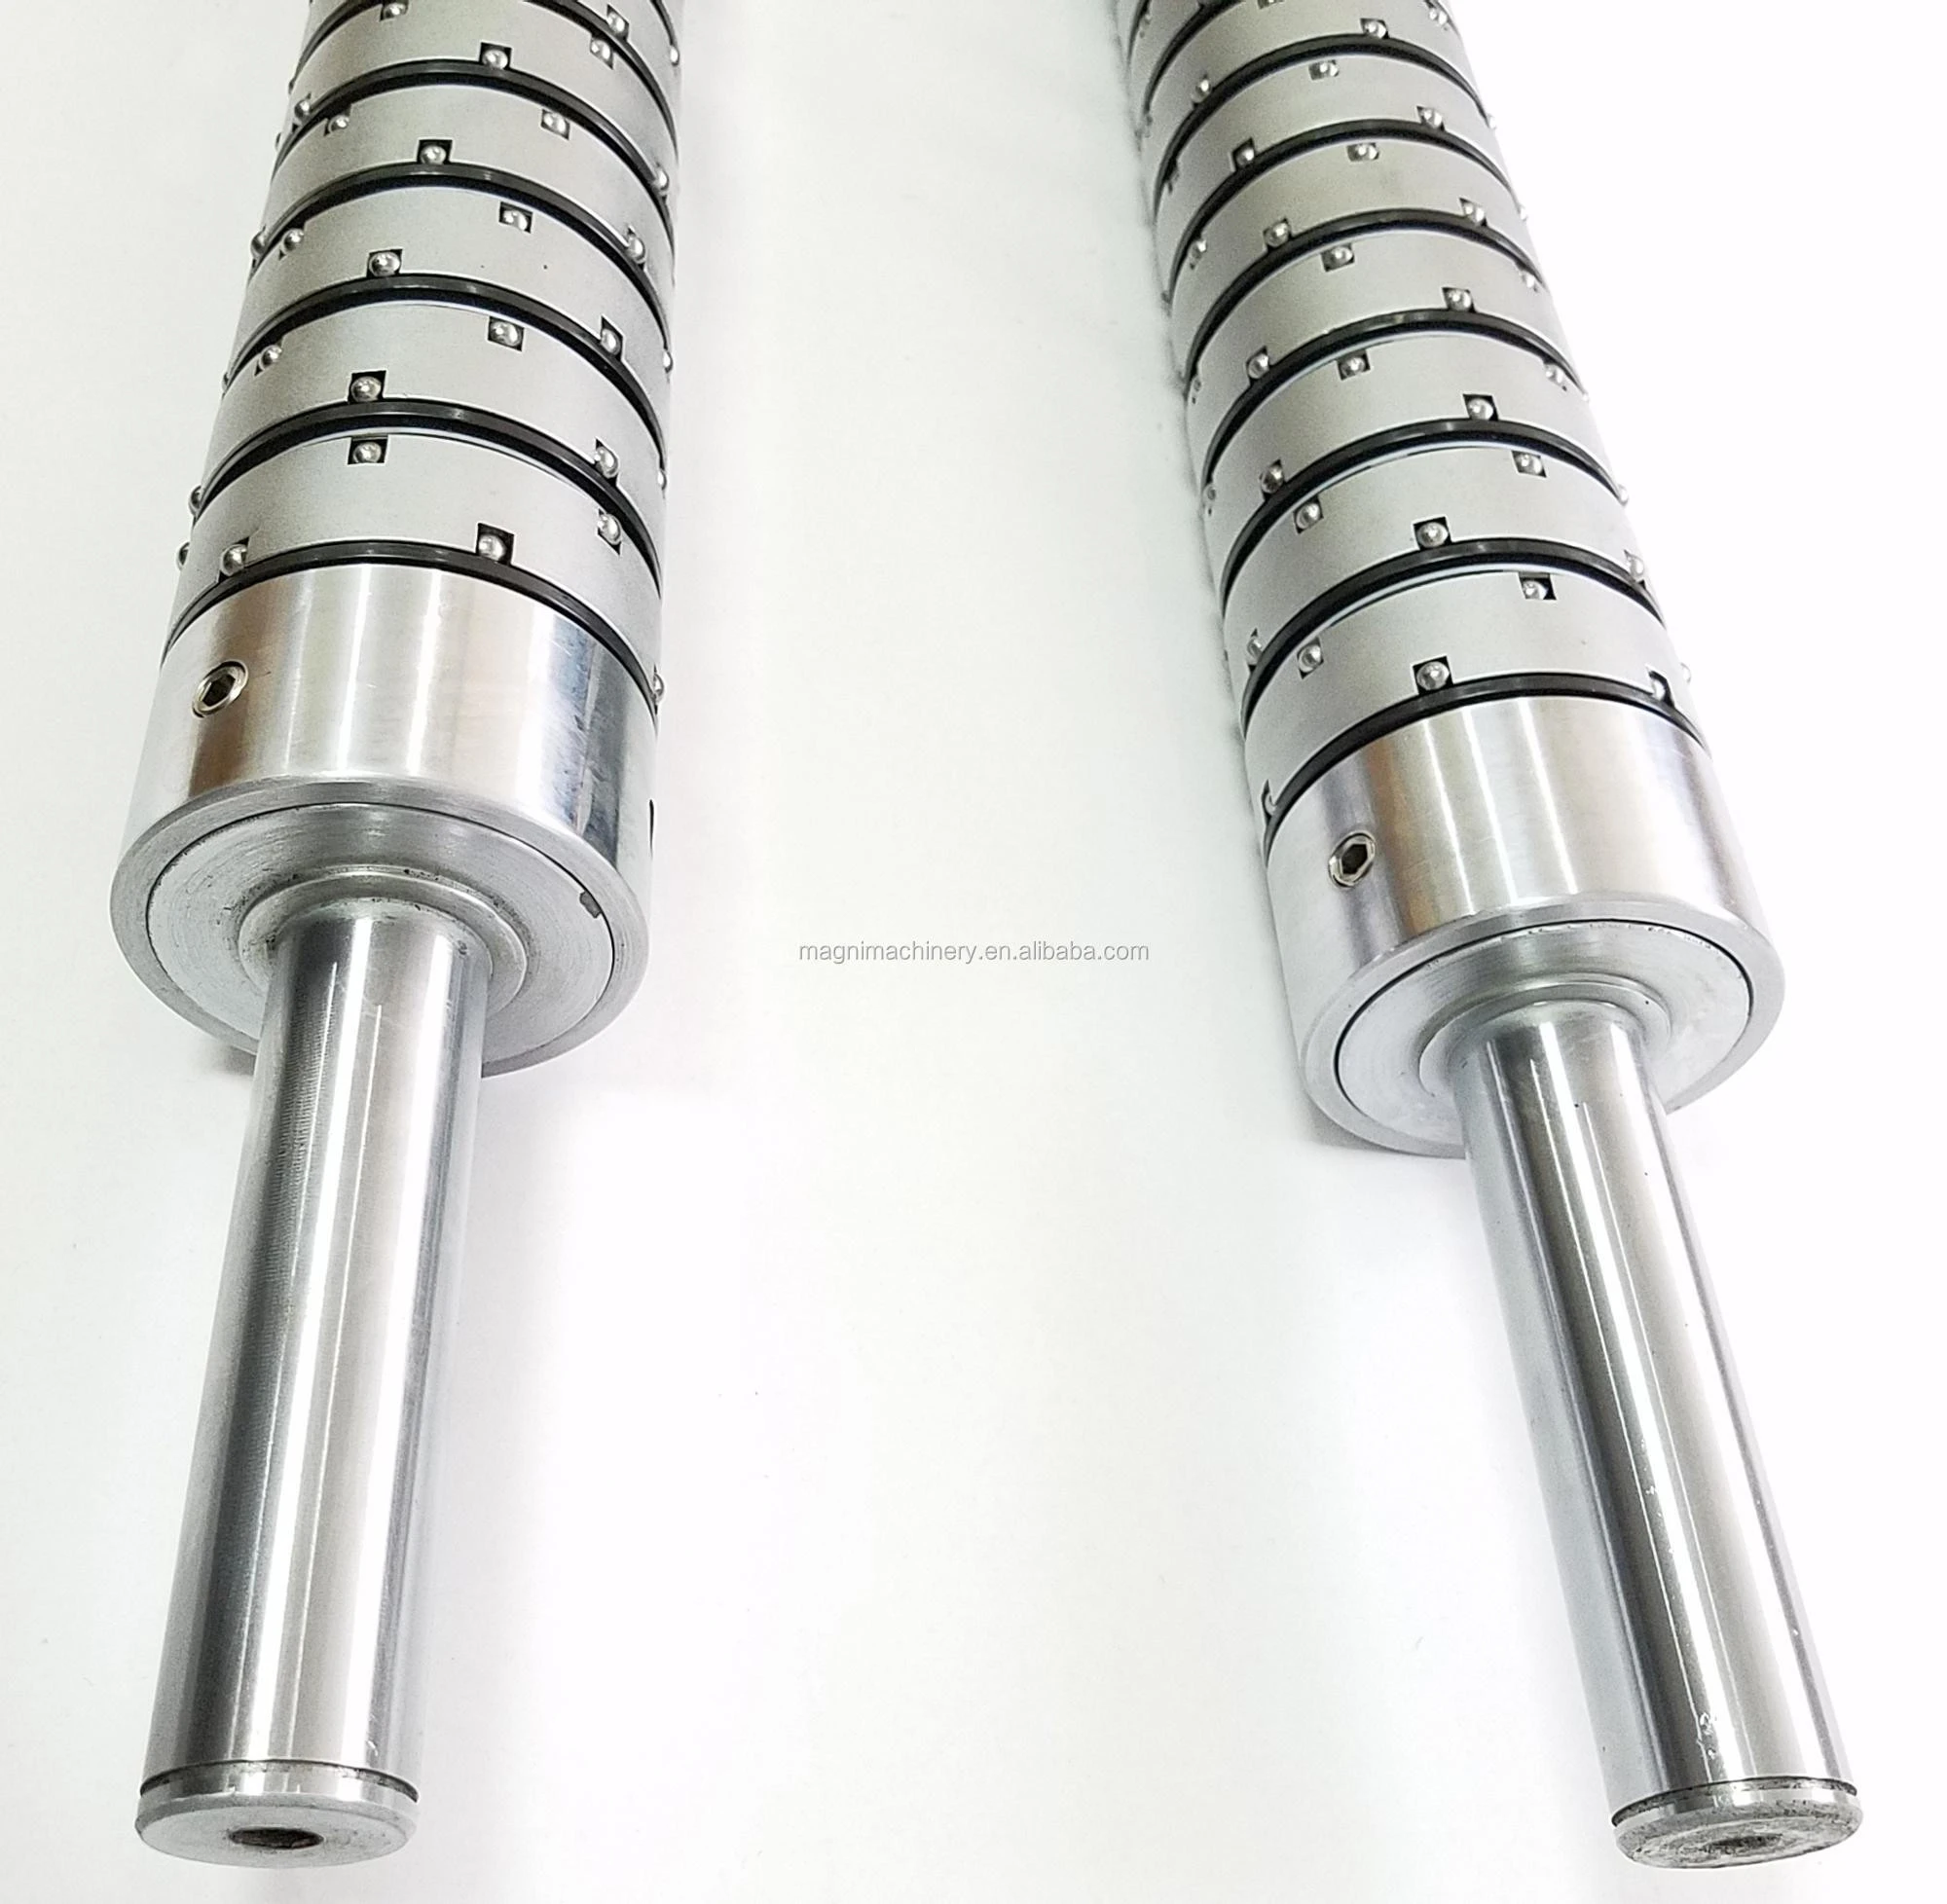 MAGNI Supplying 3&quot; 6&quot; Air Differential Rewinding Core Shafts